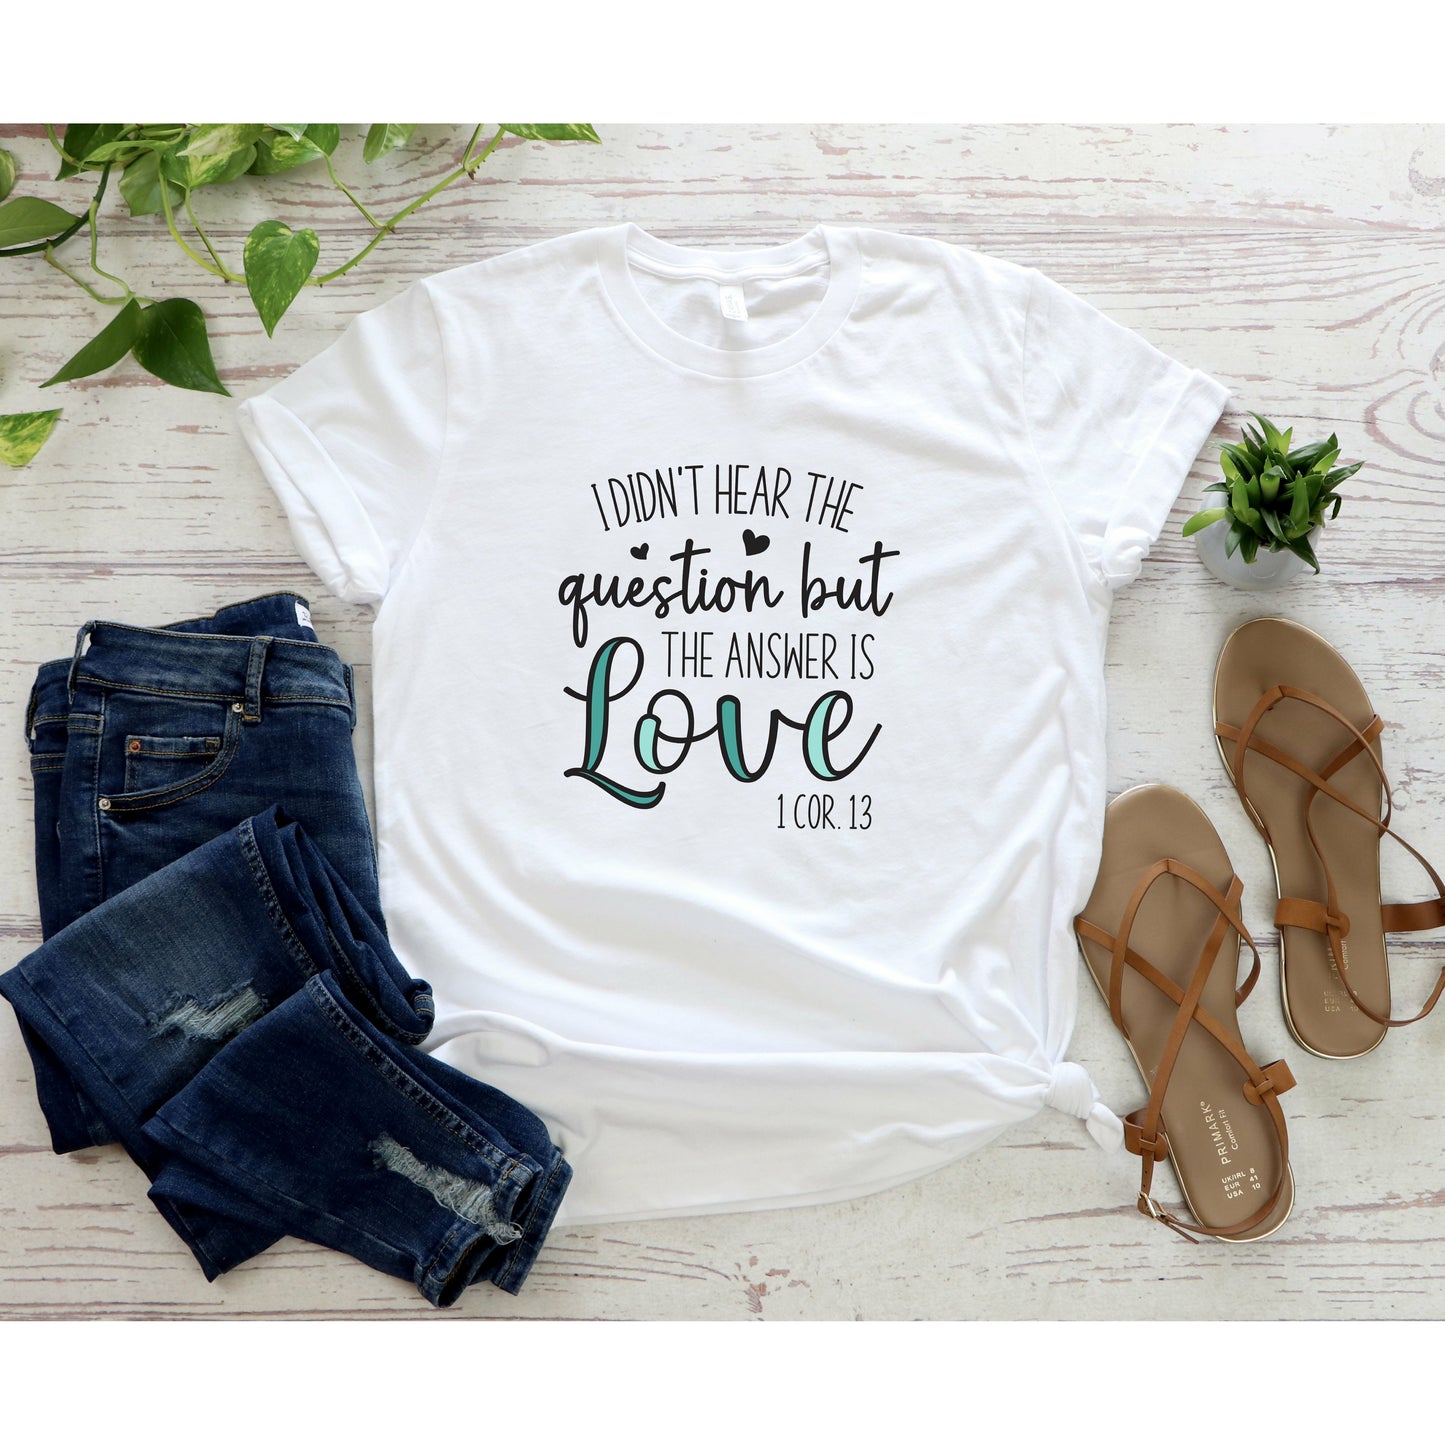 I Didn't Hear The Question But The Answer is Love Shirt | Christian T-Shirt for Women